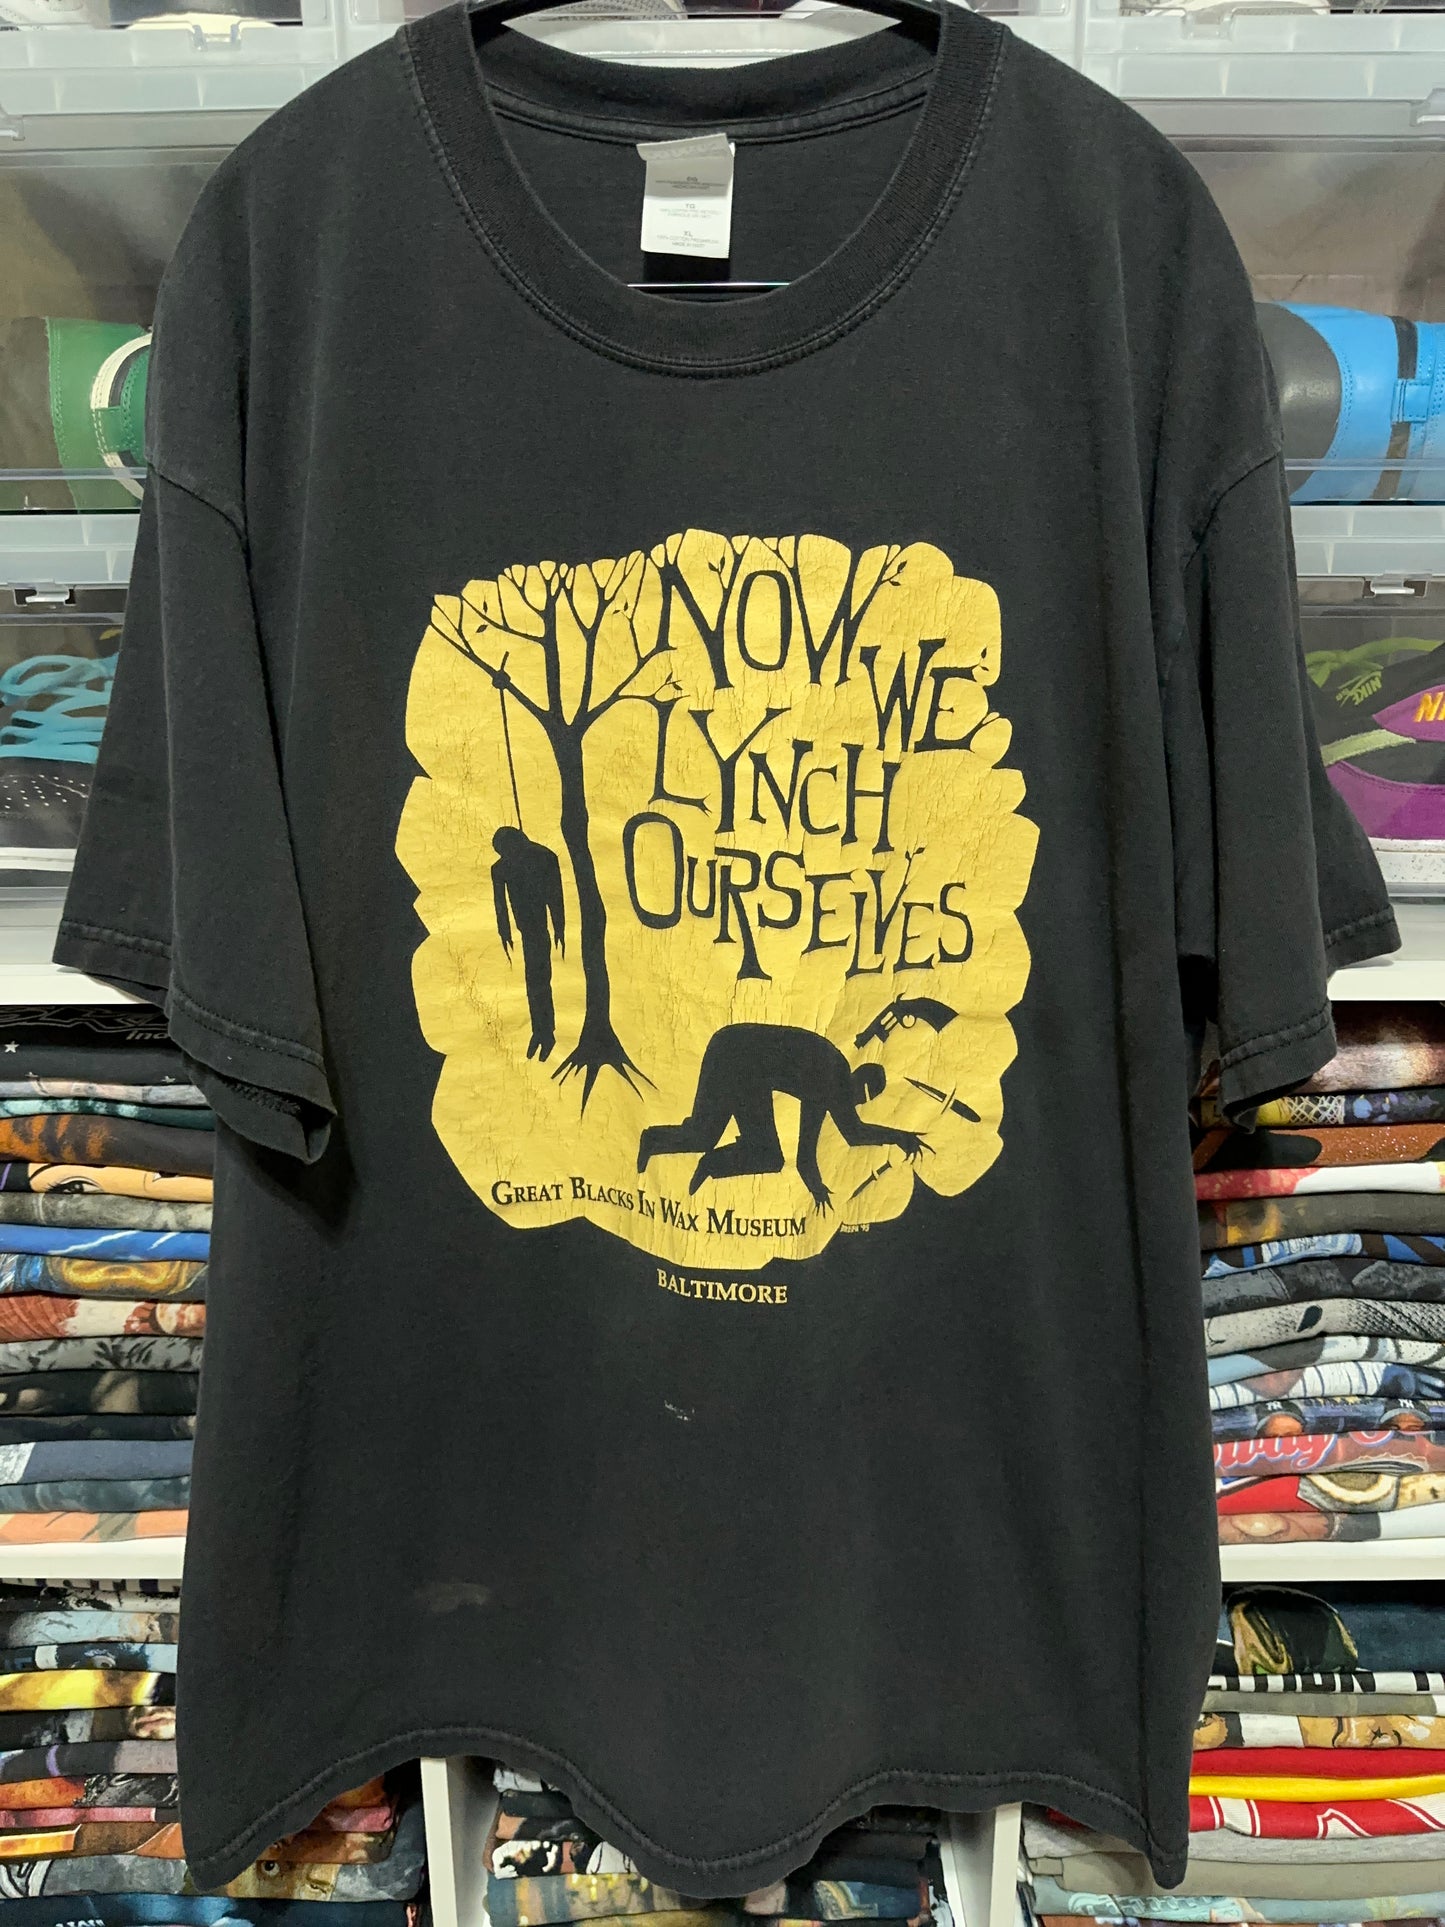 Vintage Now We Lynch Ourselves Great Blacks In Wax Museum Art Tee XL RARE